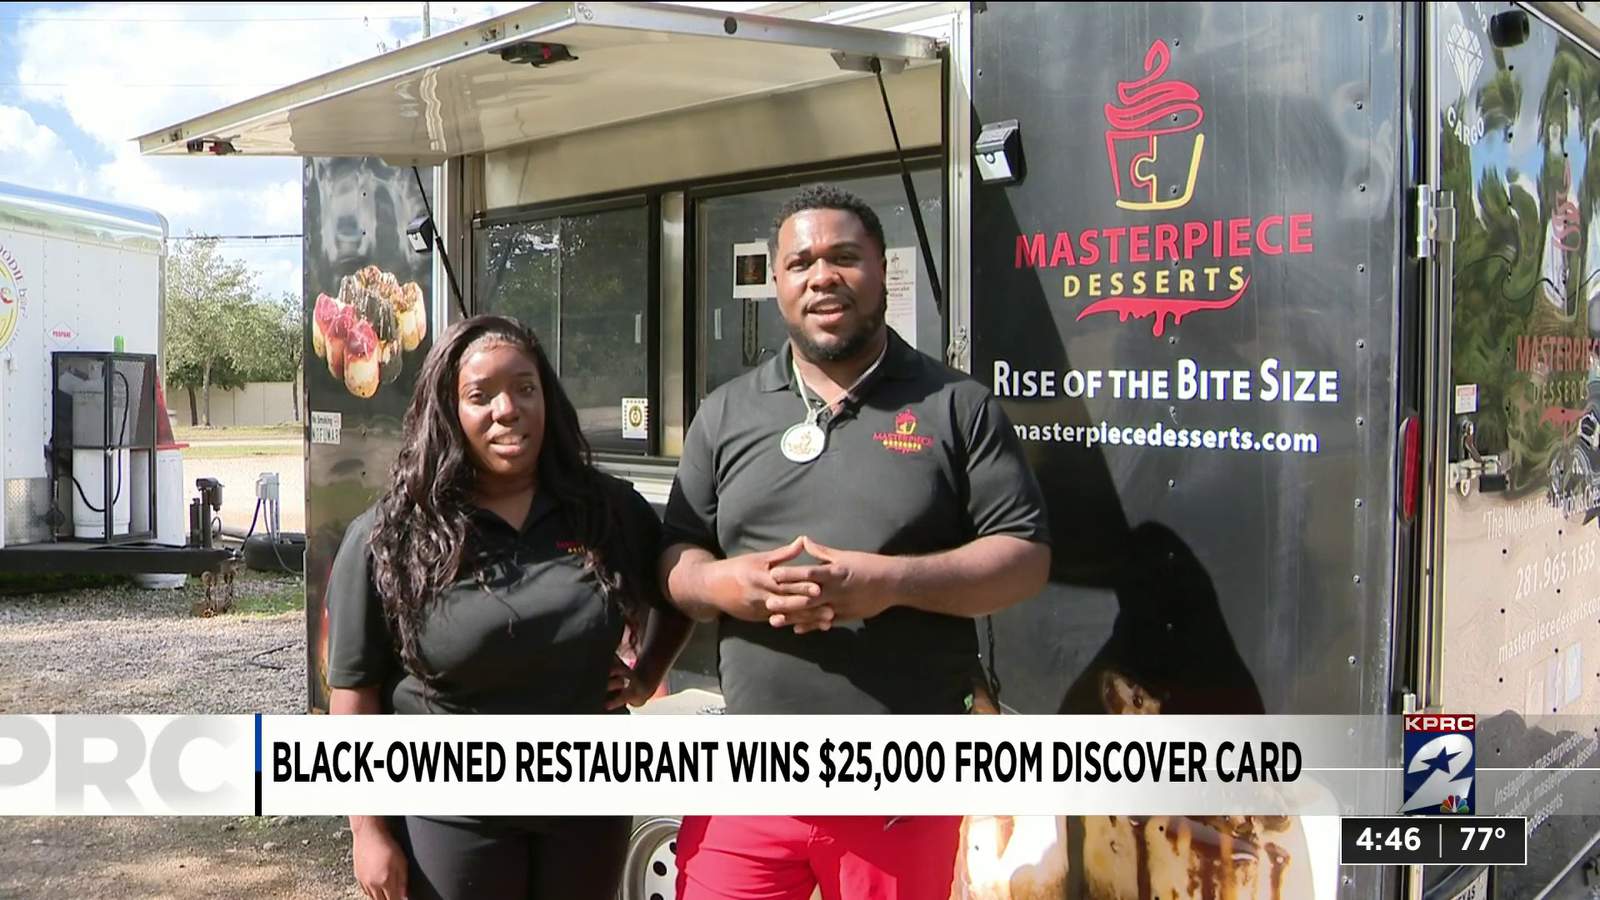 ‘We want to give back to our community’: Black-owned restaurant wins $25,000 from Discover card